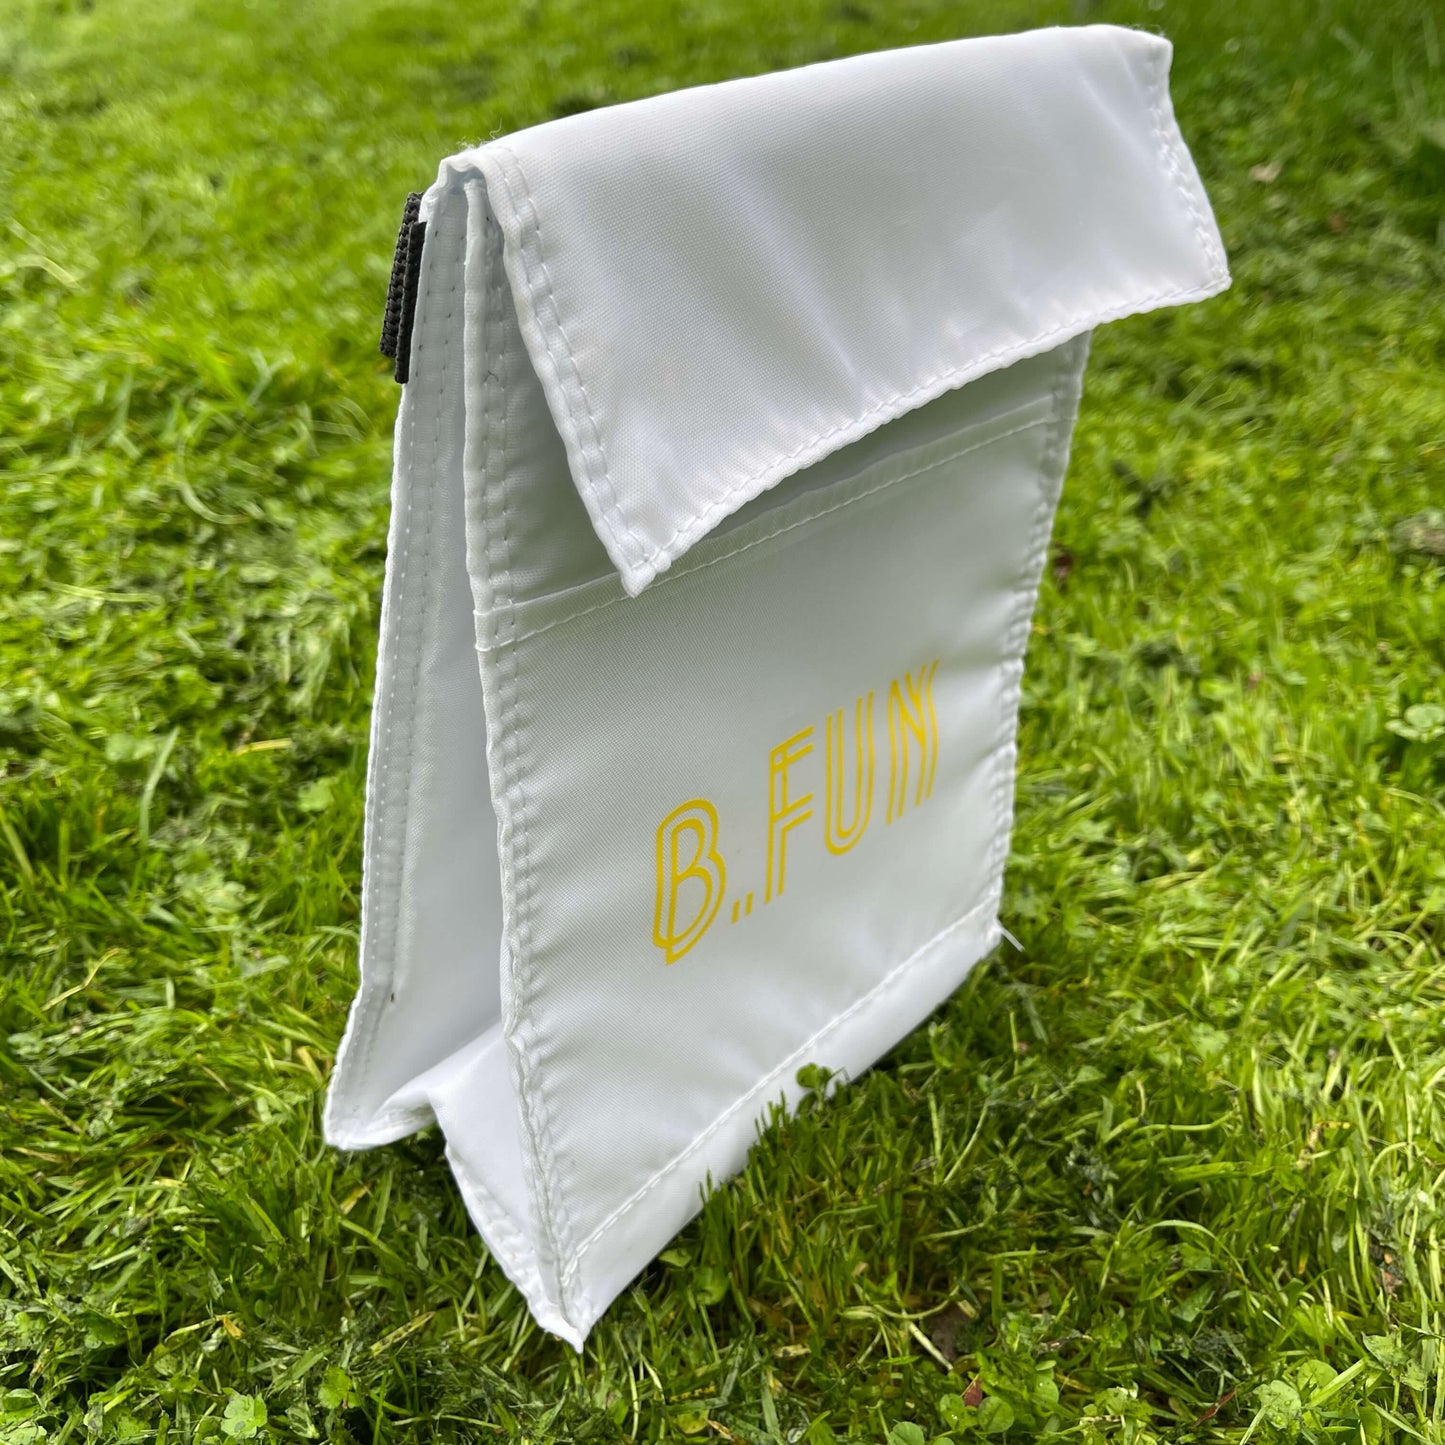 Insulated lunch carry bag in white with yellow text saying B.FUN sitting on green grass.